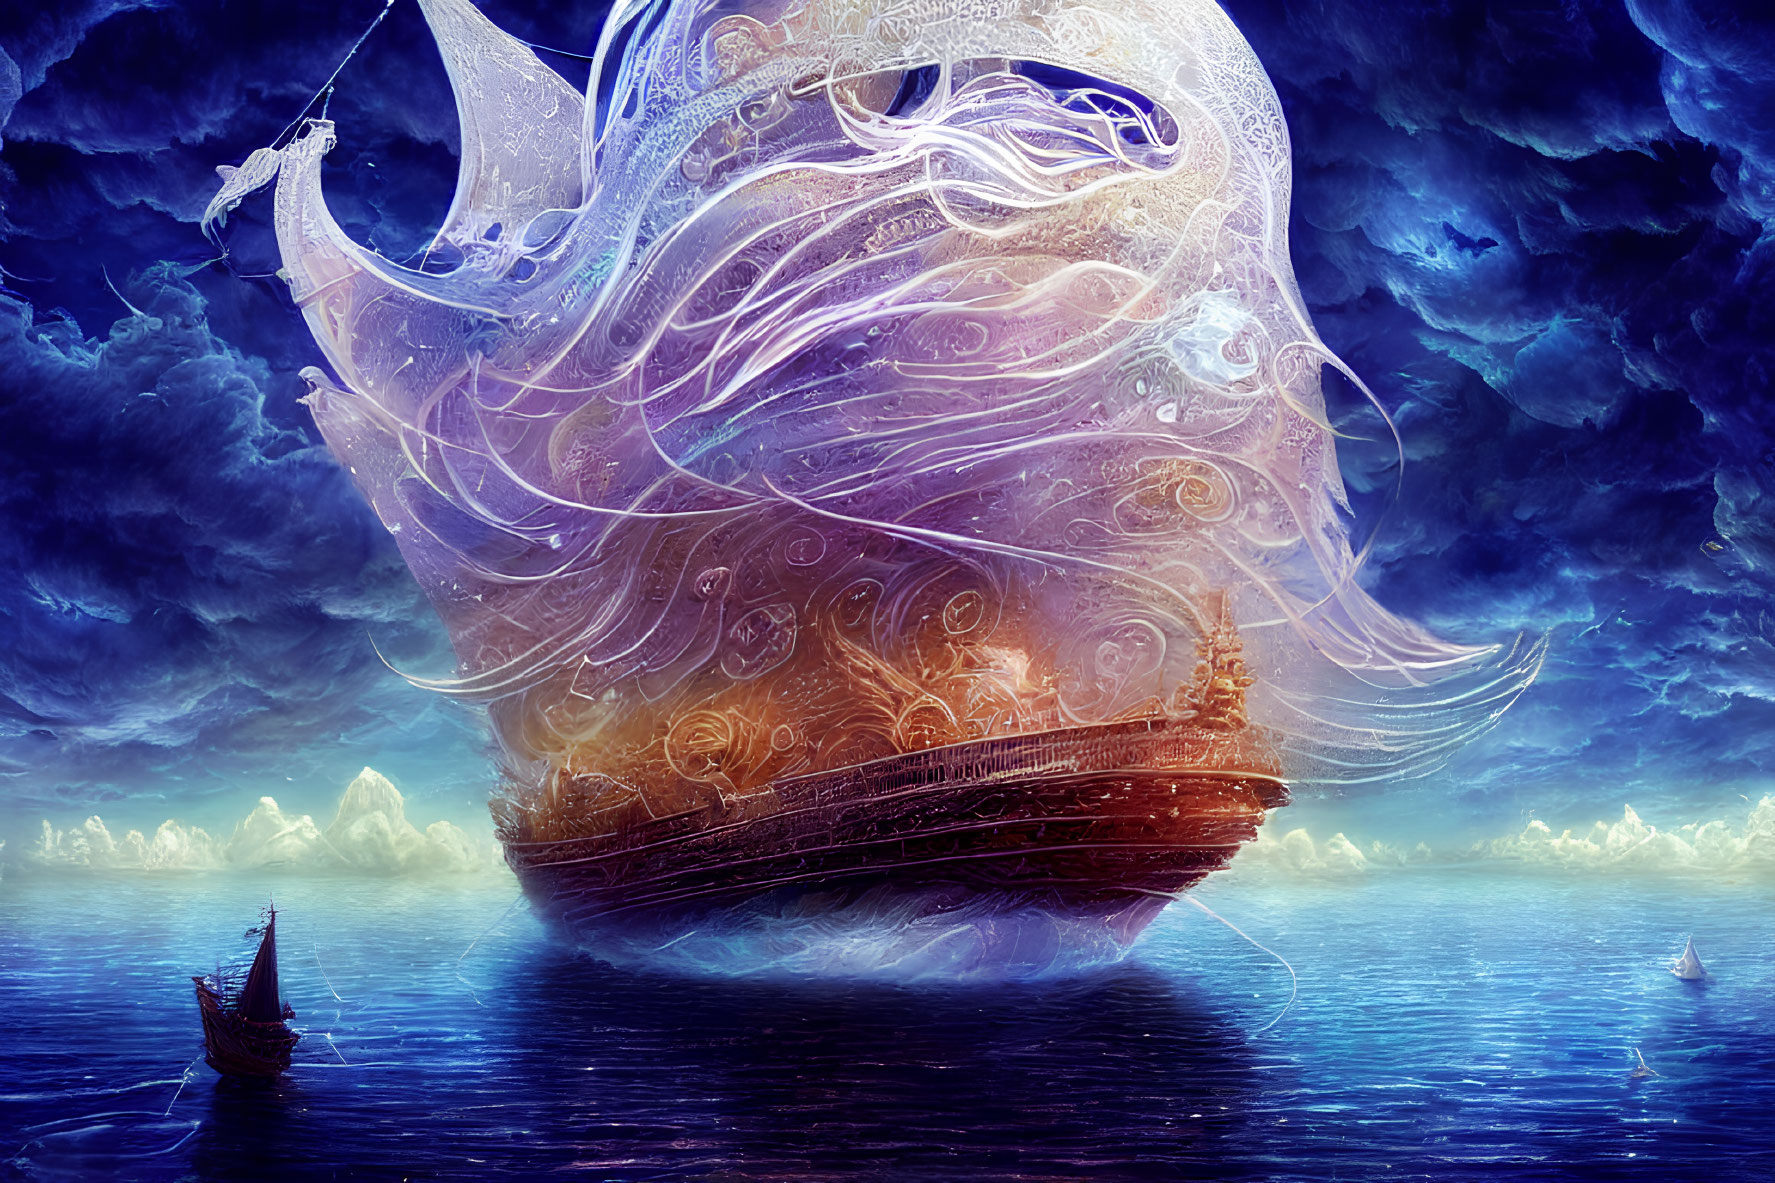 Fantasy sailing ship with ornate, ghostly sails on calm ocean at twilight